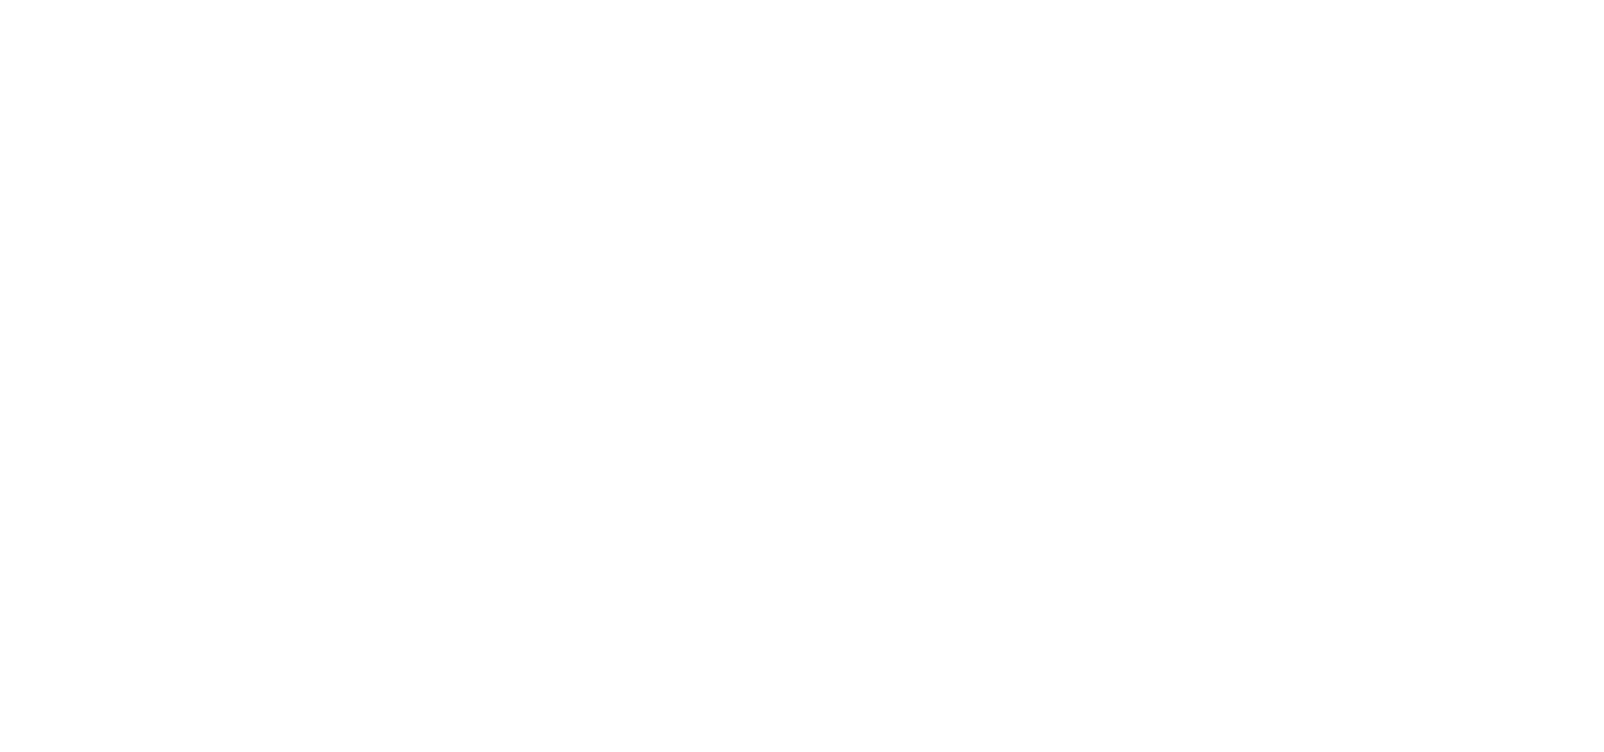 U.S. Physical Therapy logo large for dark backgrounds (transparent PNG)